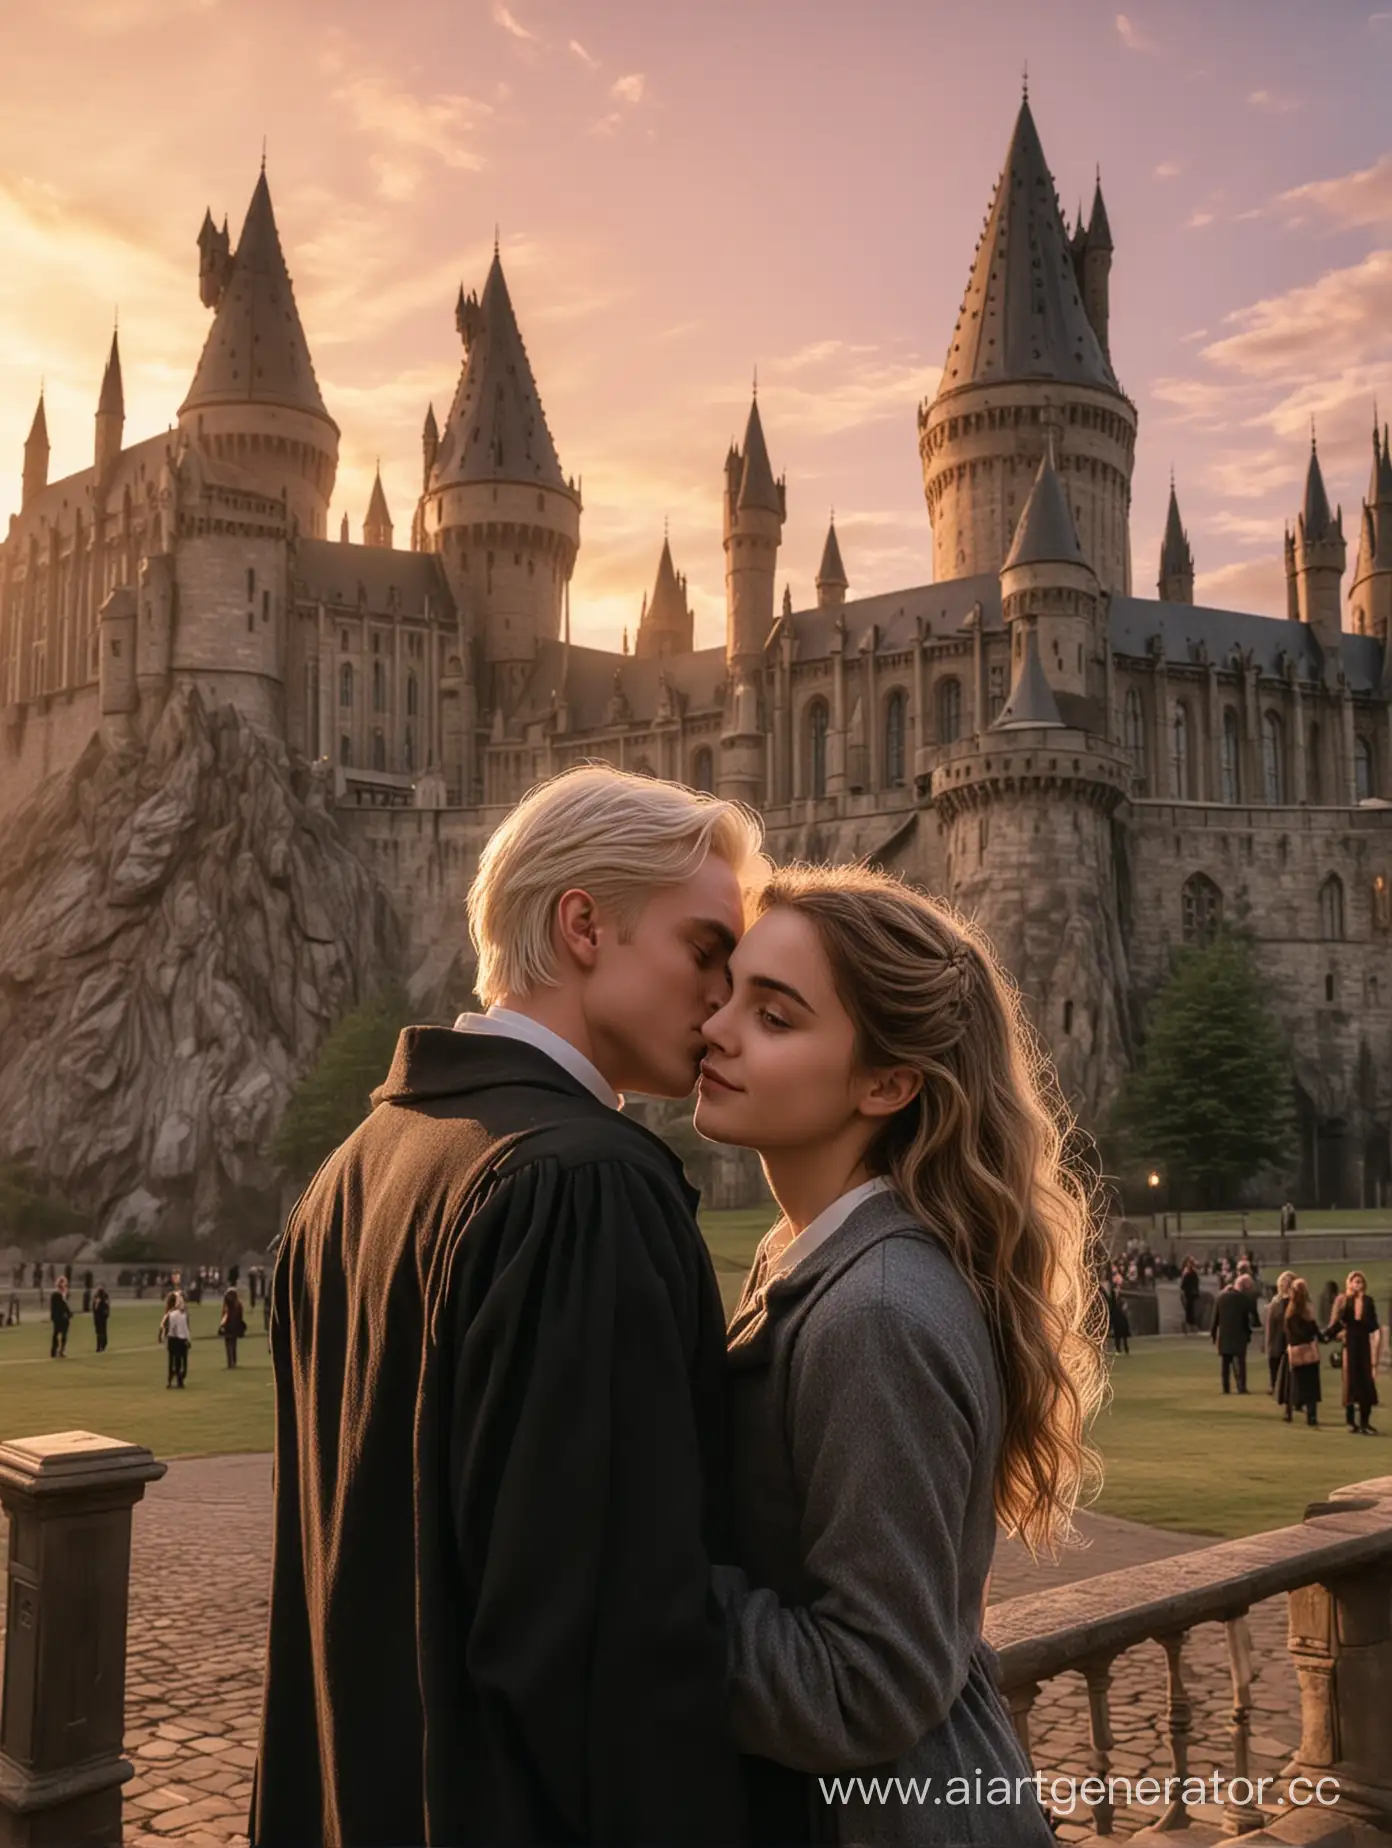 Hermione-Granger-and-Draco-Malfoy-Standing-Back-to-Back-at-Hogwarts-Castle-at-Sunset